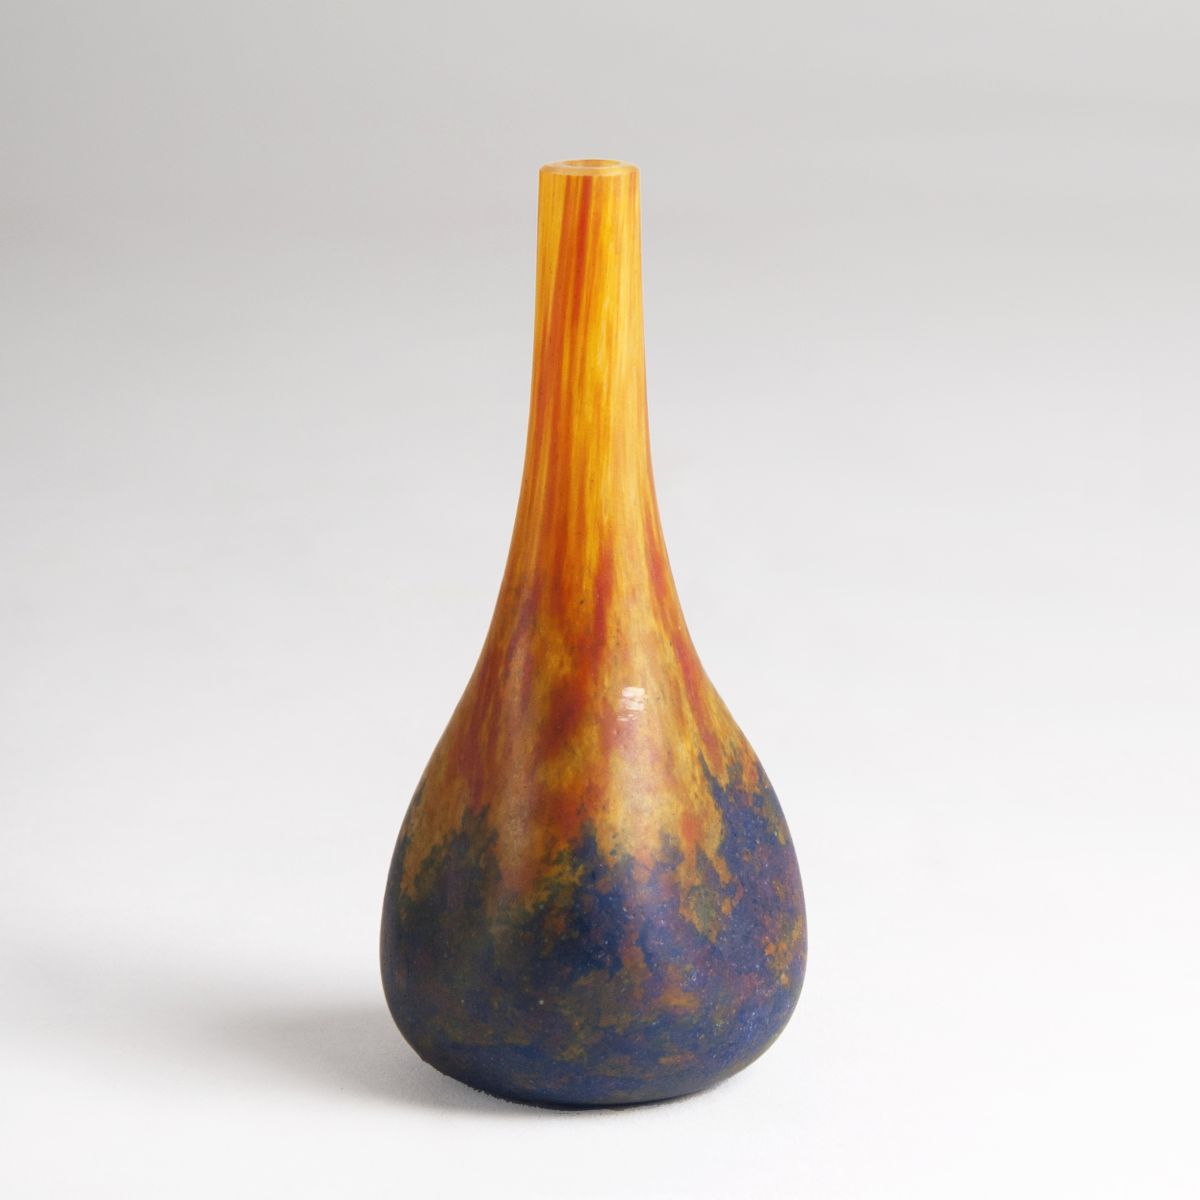 A small narrow neck Vase with mottled decor